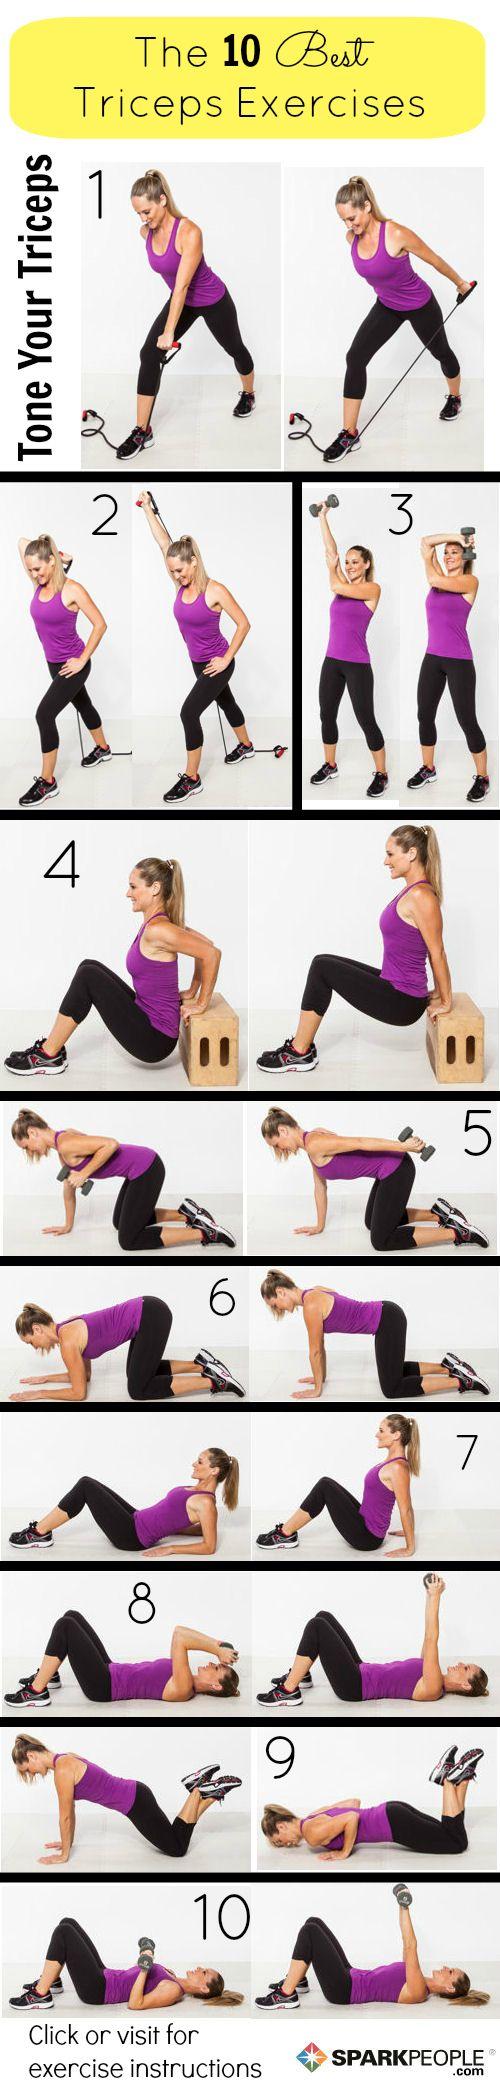 Wedding - 10 Best Triceps Moves From Spark People 